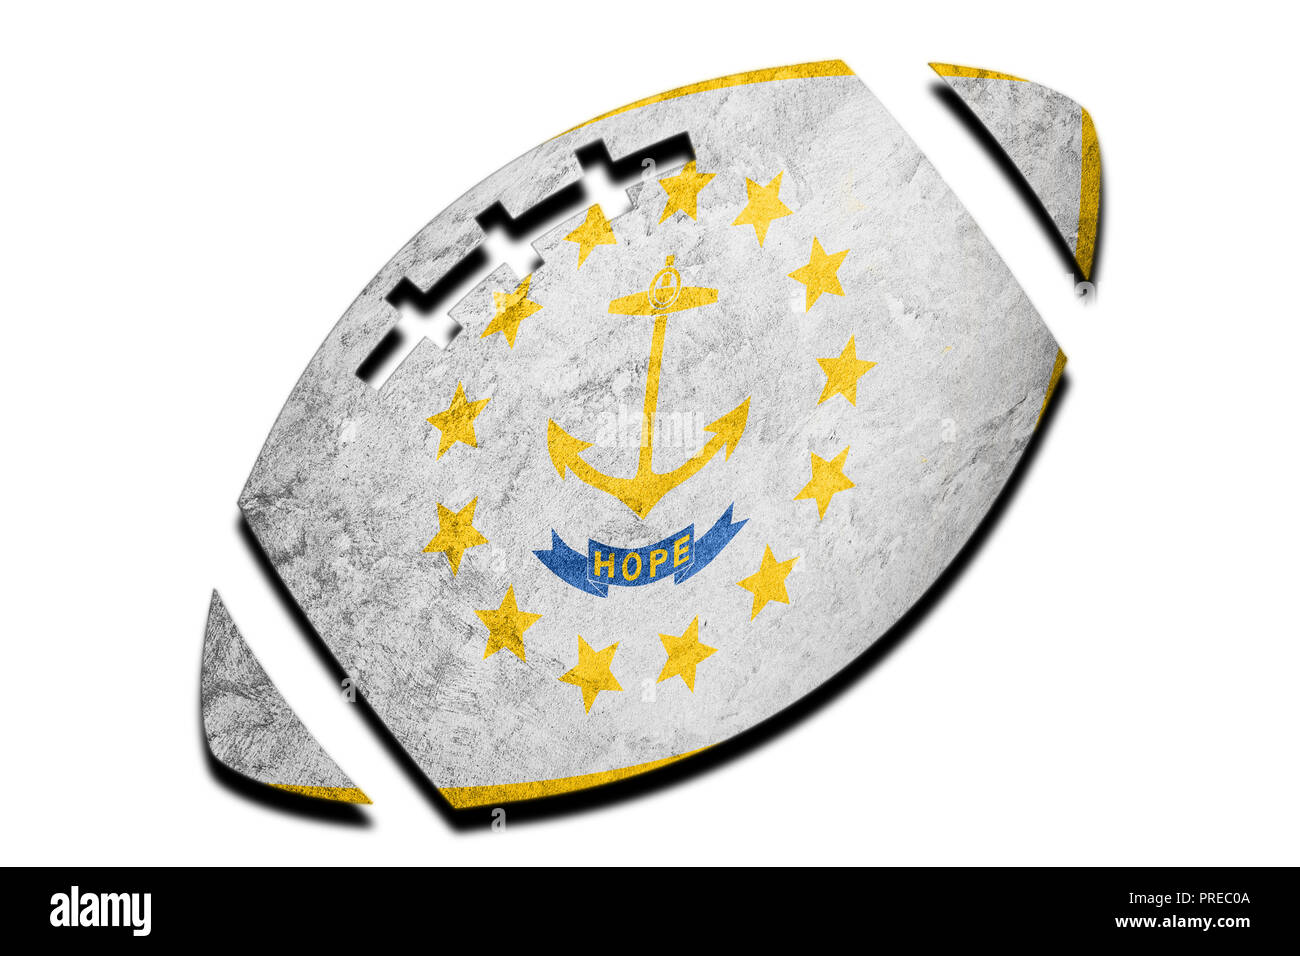 Rugby ball Rhode Island state flag. Rhode Island flag background Rugby ball Stock Photo